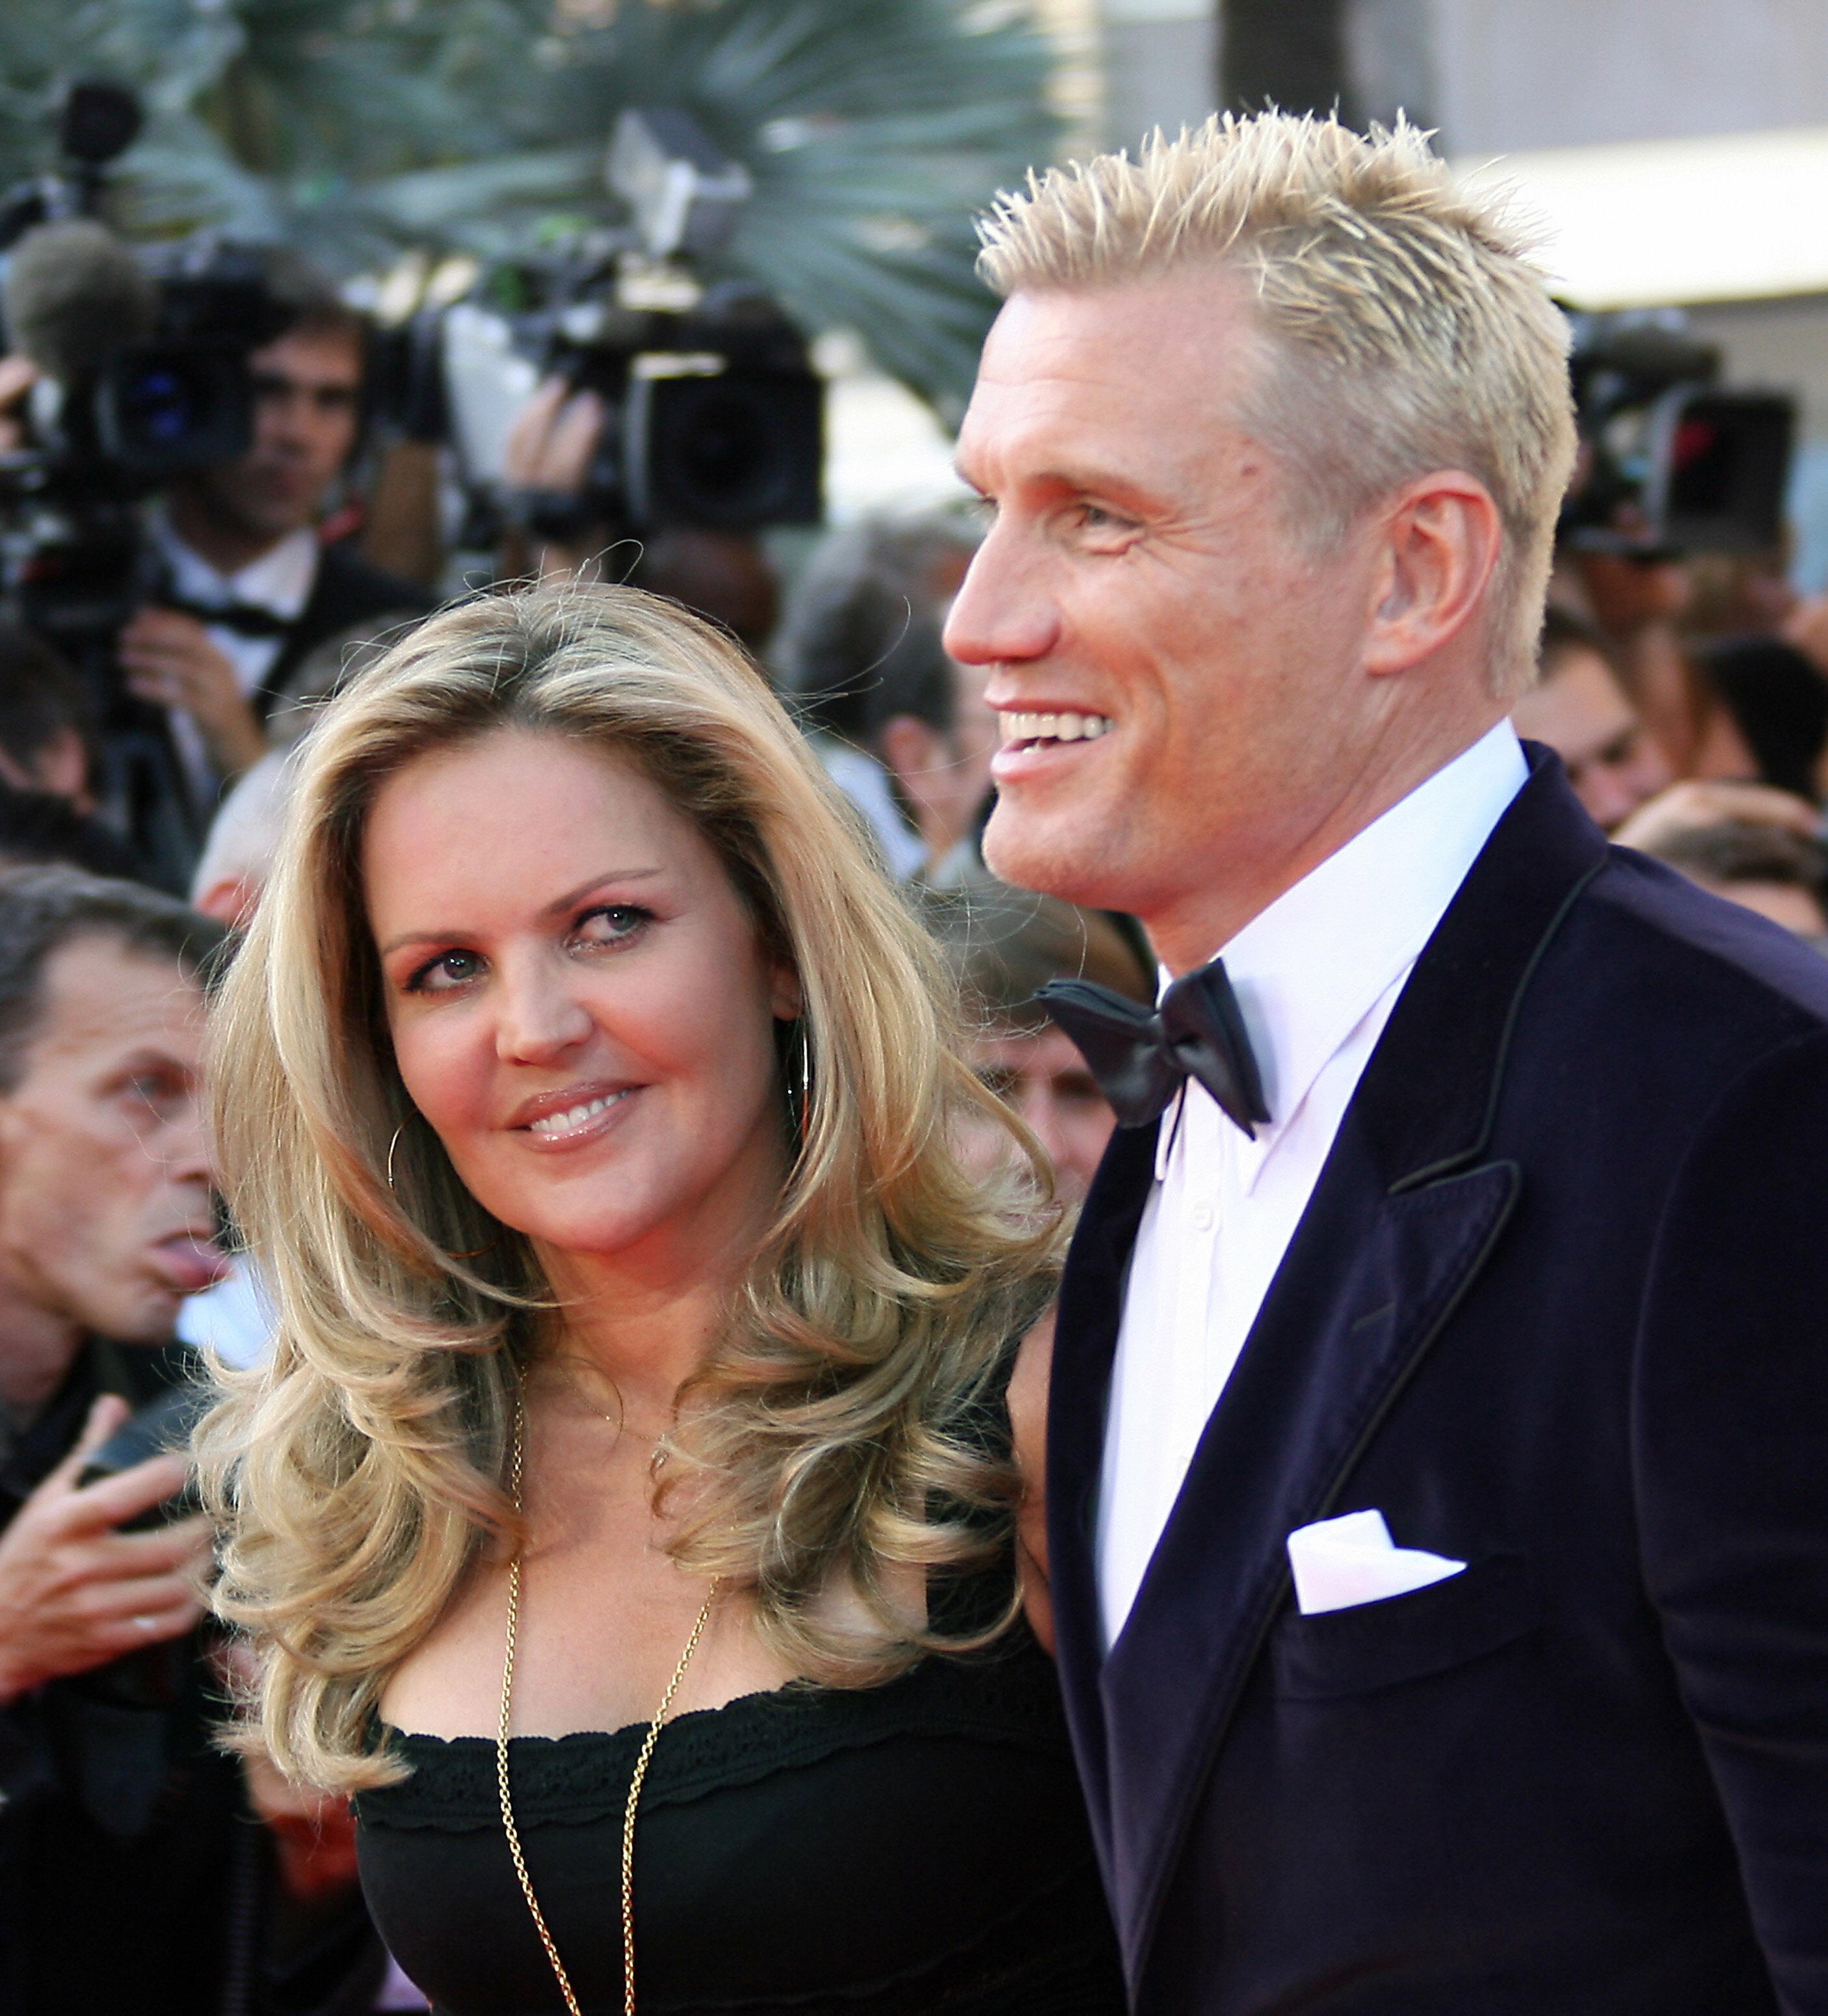 Dolph Lundgren and Anette Qviberg at the Festival Palace in Cannes, southern France, on 24 May 2007 | Source: Getty Images